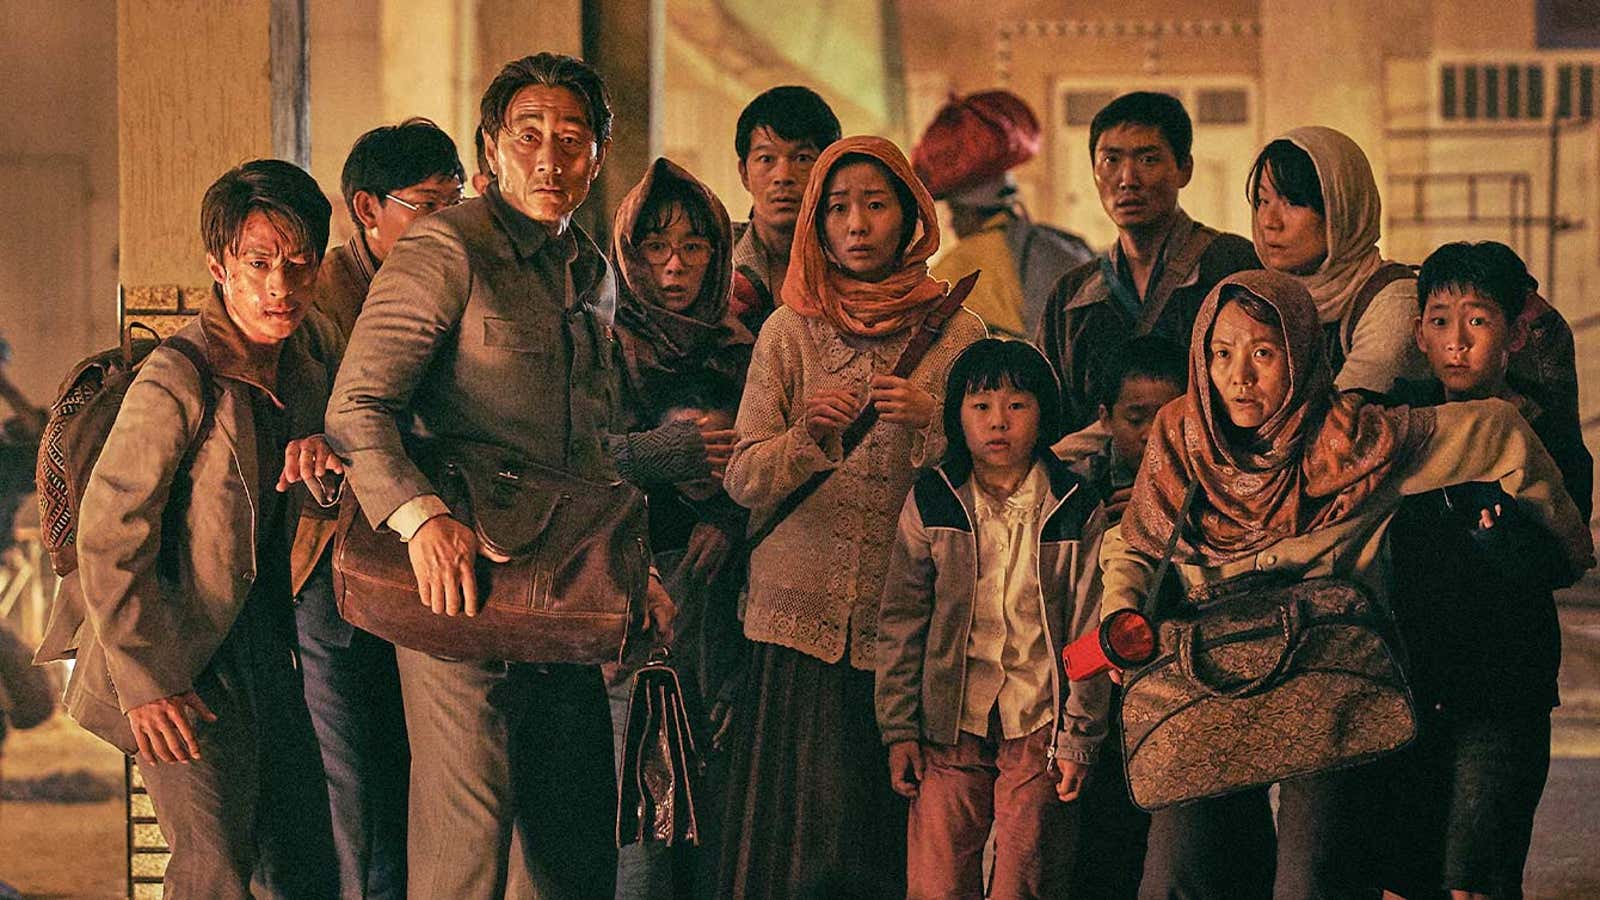 In ‘Escape from Mogadishu,’ North Koreans and South Koreans work towards a common goal.